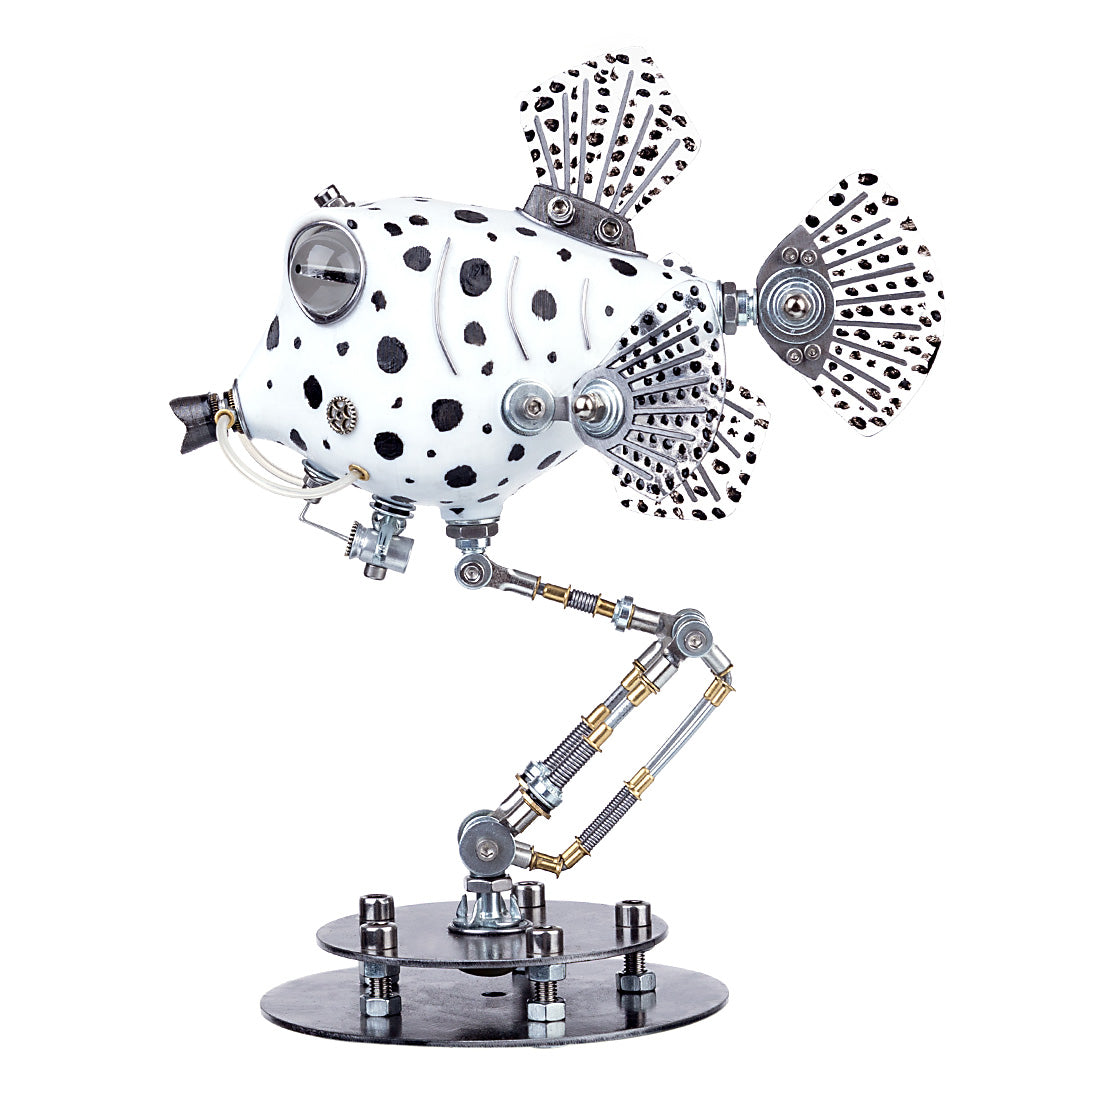 Metal Black & White Cowfish Model Kits 3D Handmade Assembled Steampunk Crafts for Home Decor